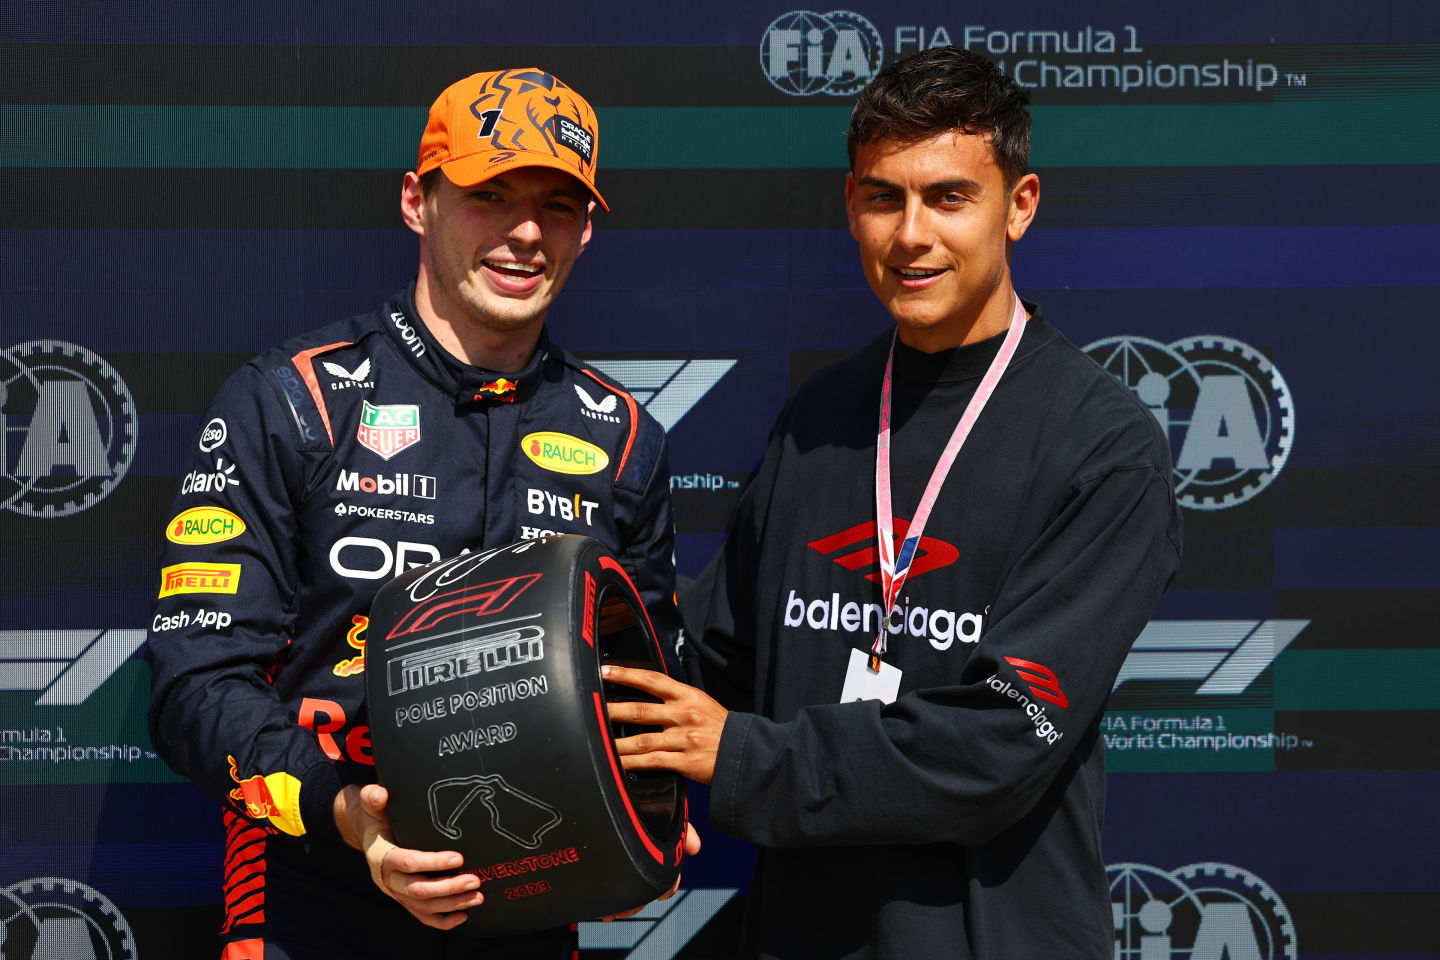 NORTHAMPTON, ENGLAND - JULY 08: Pole position qualifier Max Verstappen of the Netherlands and